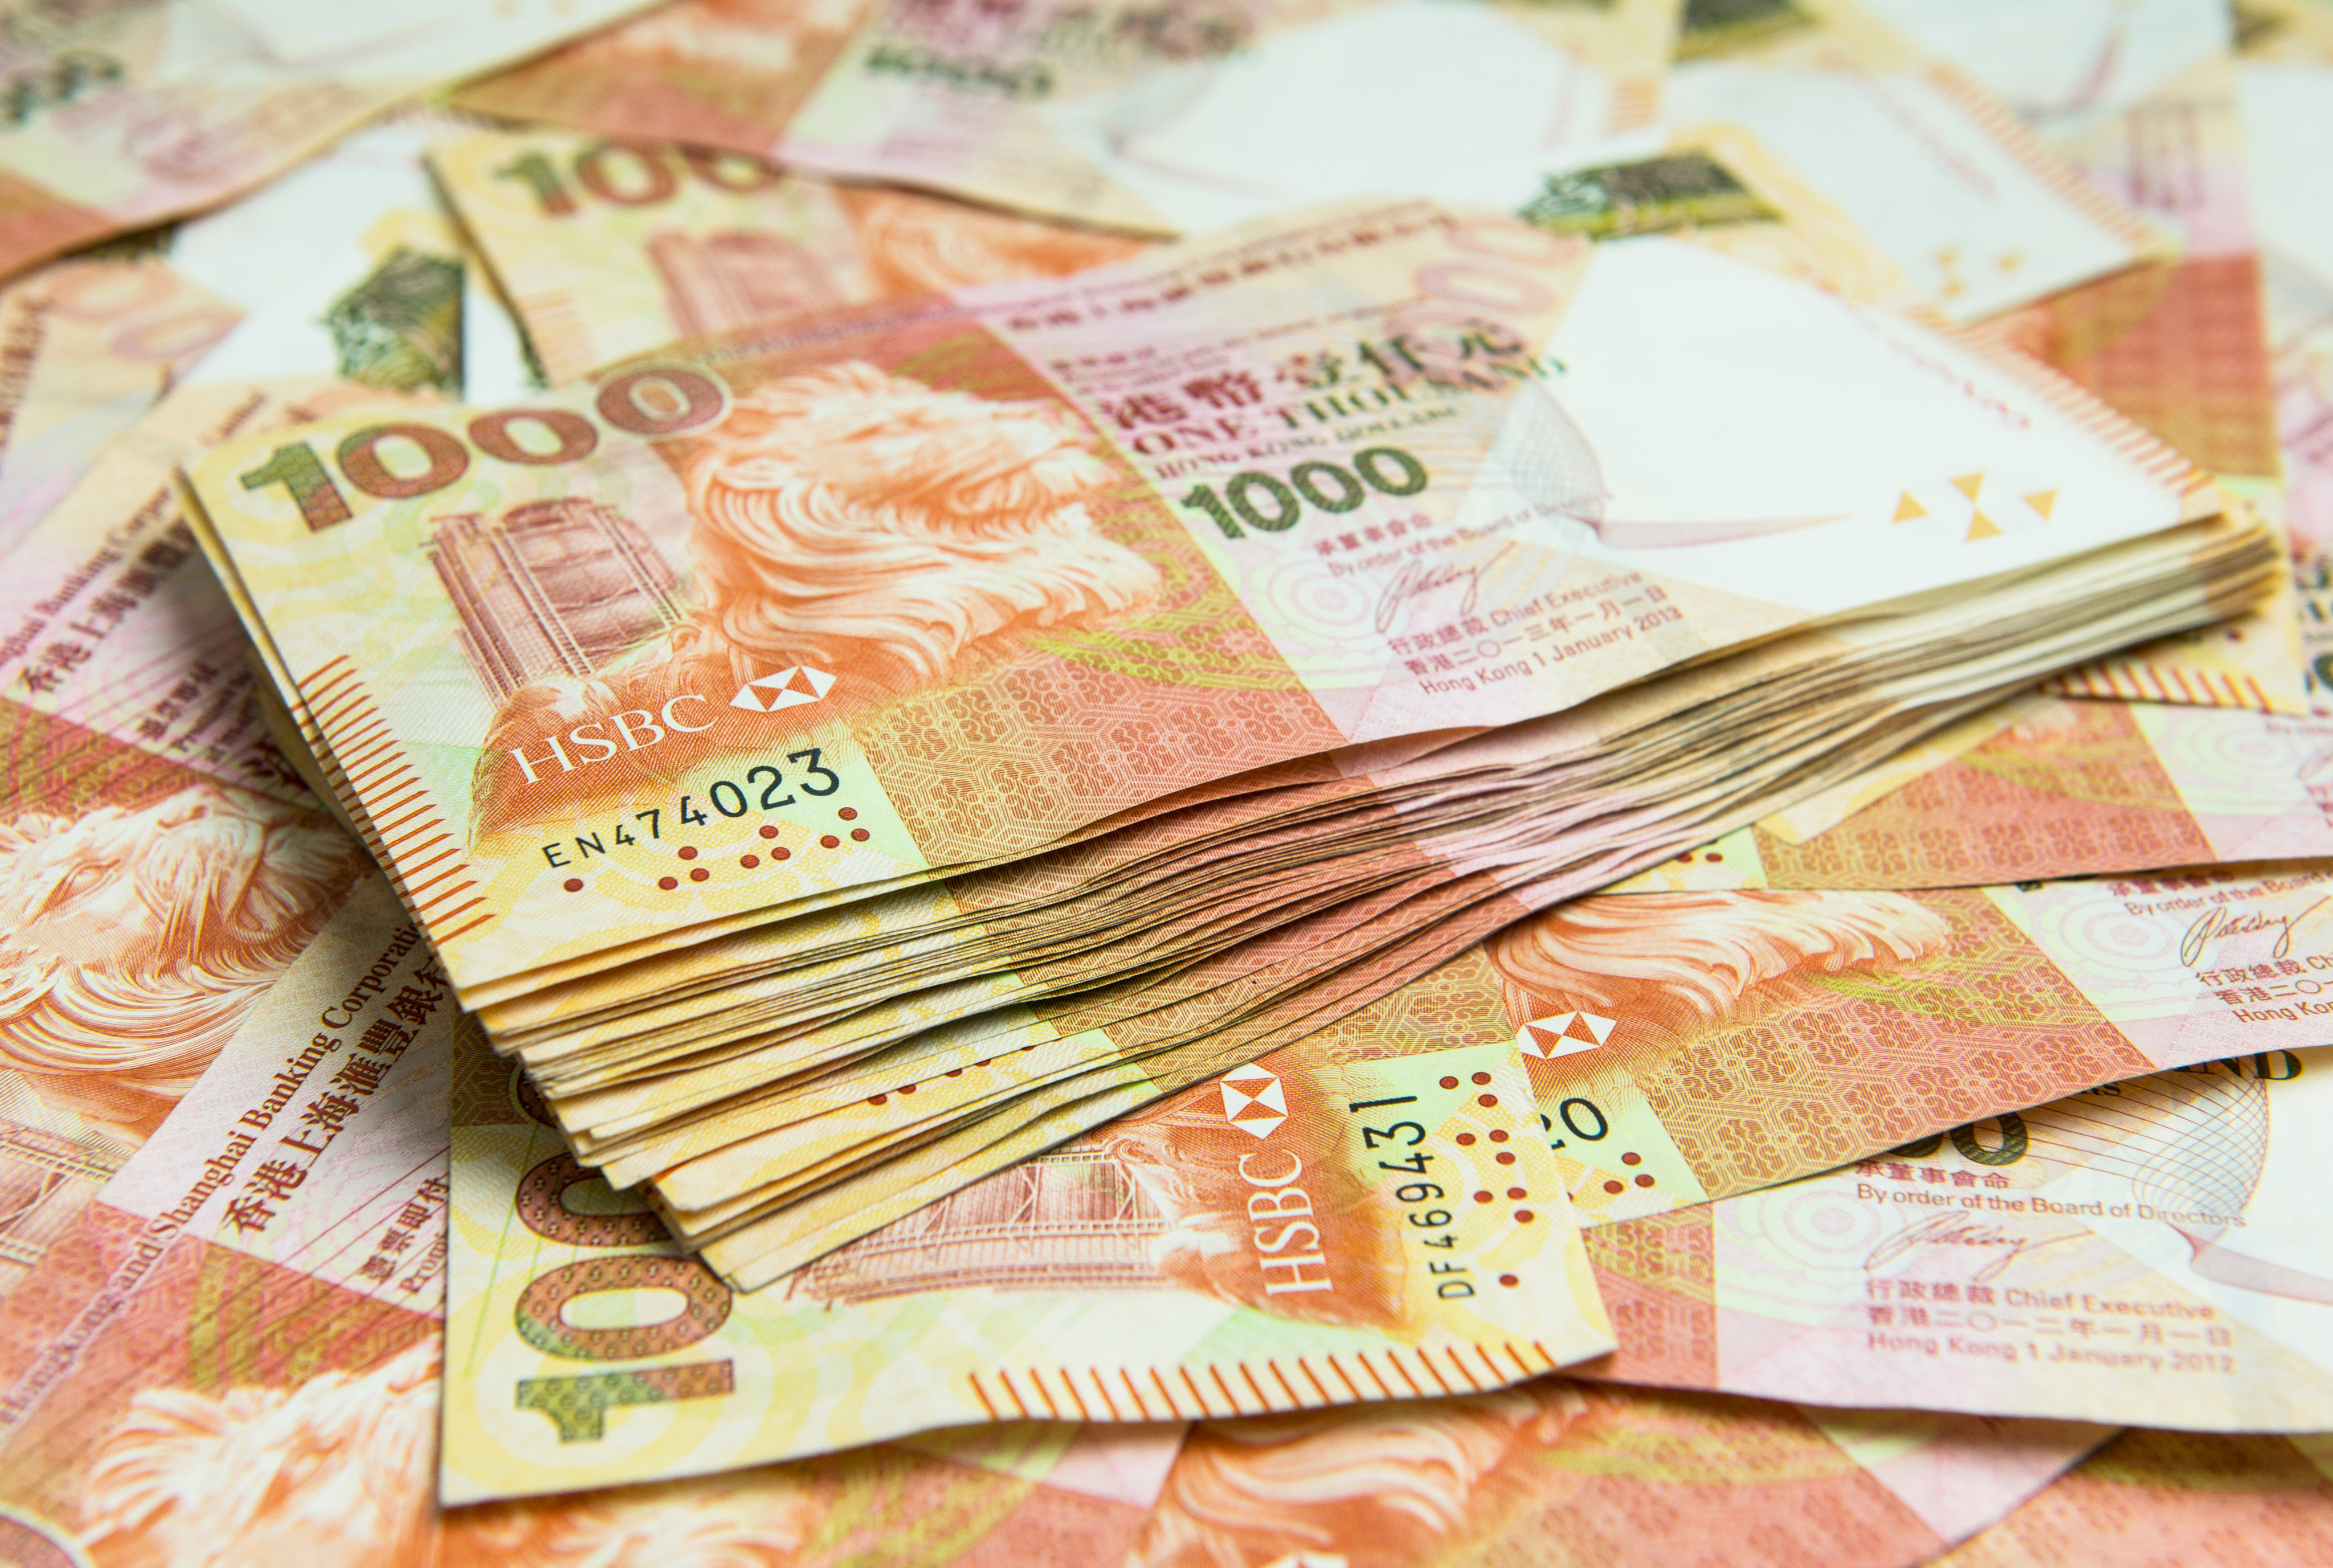 The returns of Hong Kong’s Exchange Fund, the war chest used to defend the local currency, fell last year. Photo: Shutterstock